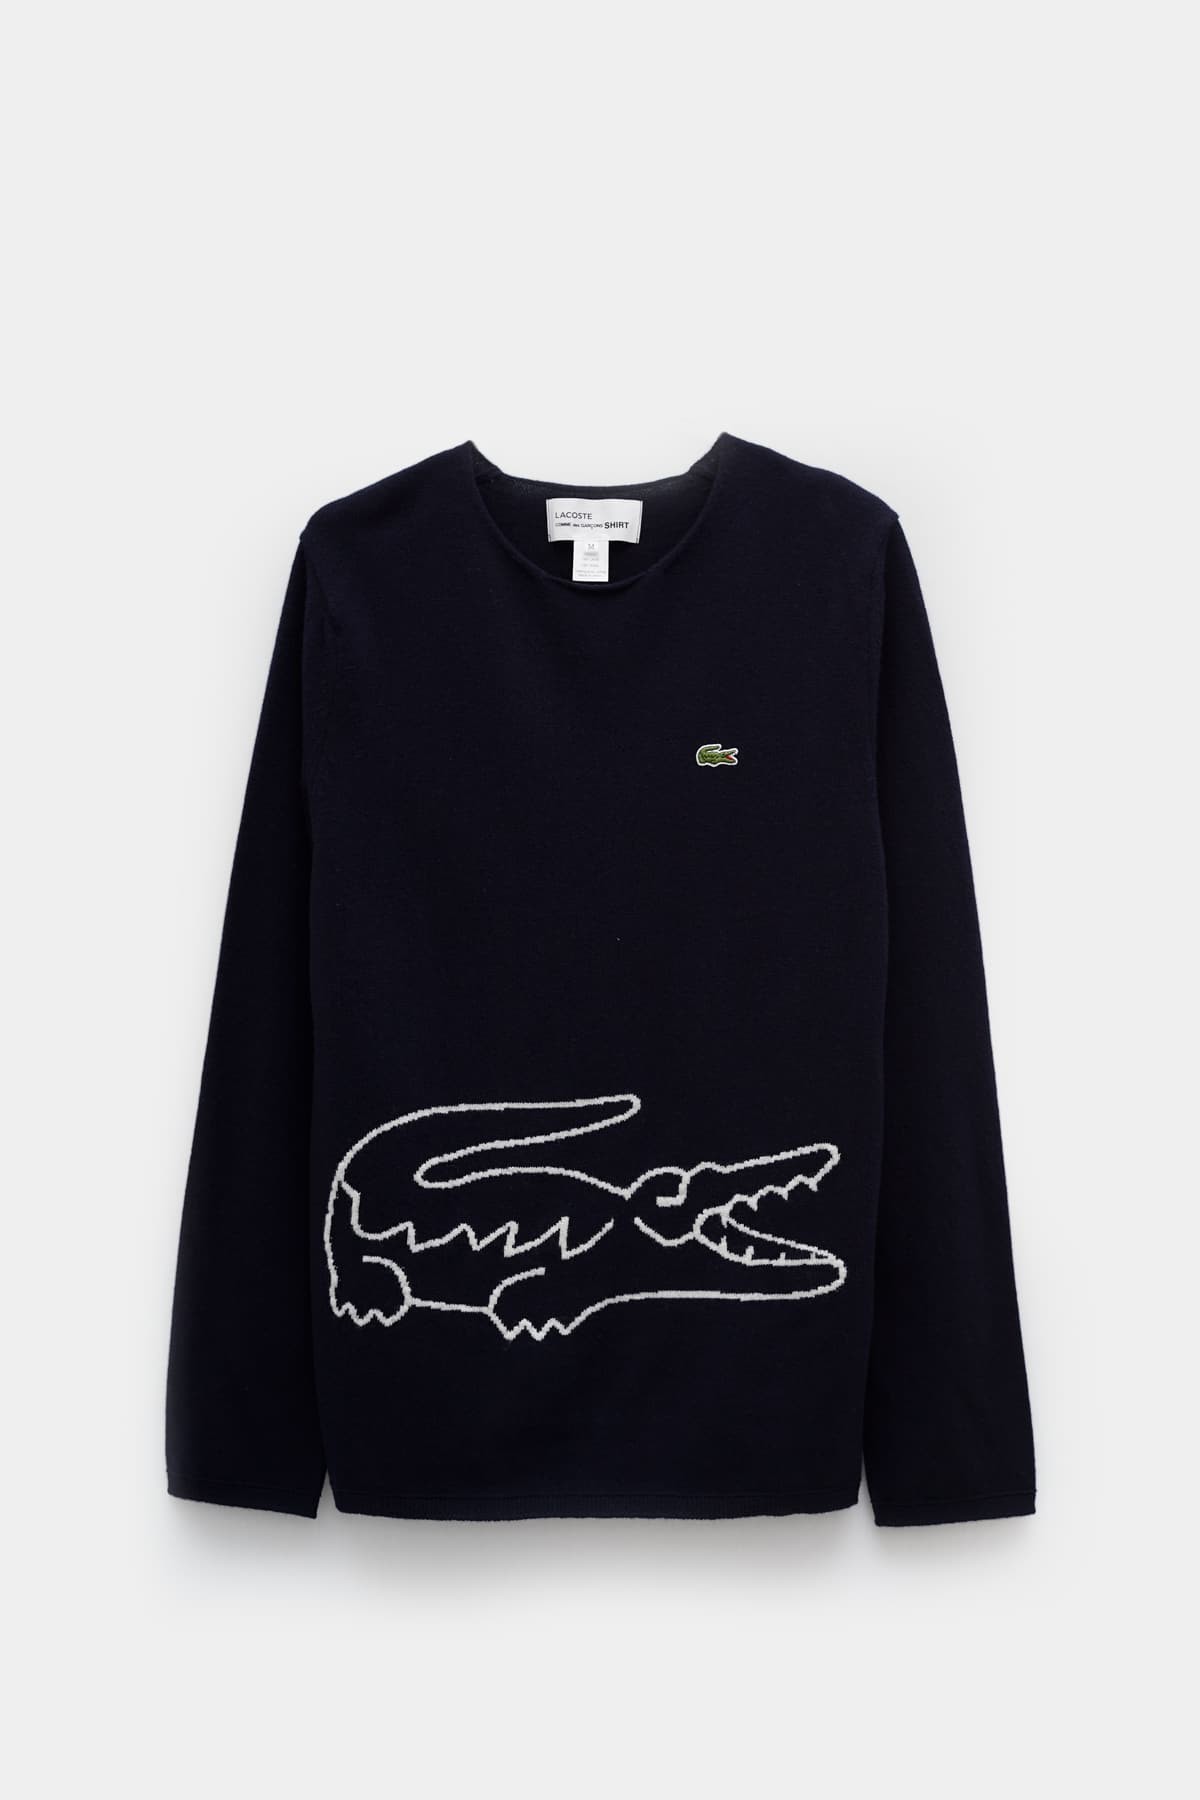 COMME DES GARCONS SHIRT X LACOSTE NAVY SWEATER IAMNUE